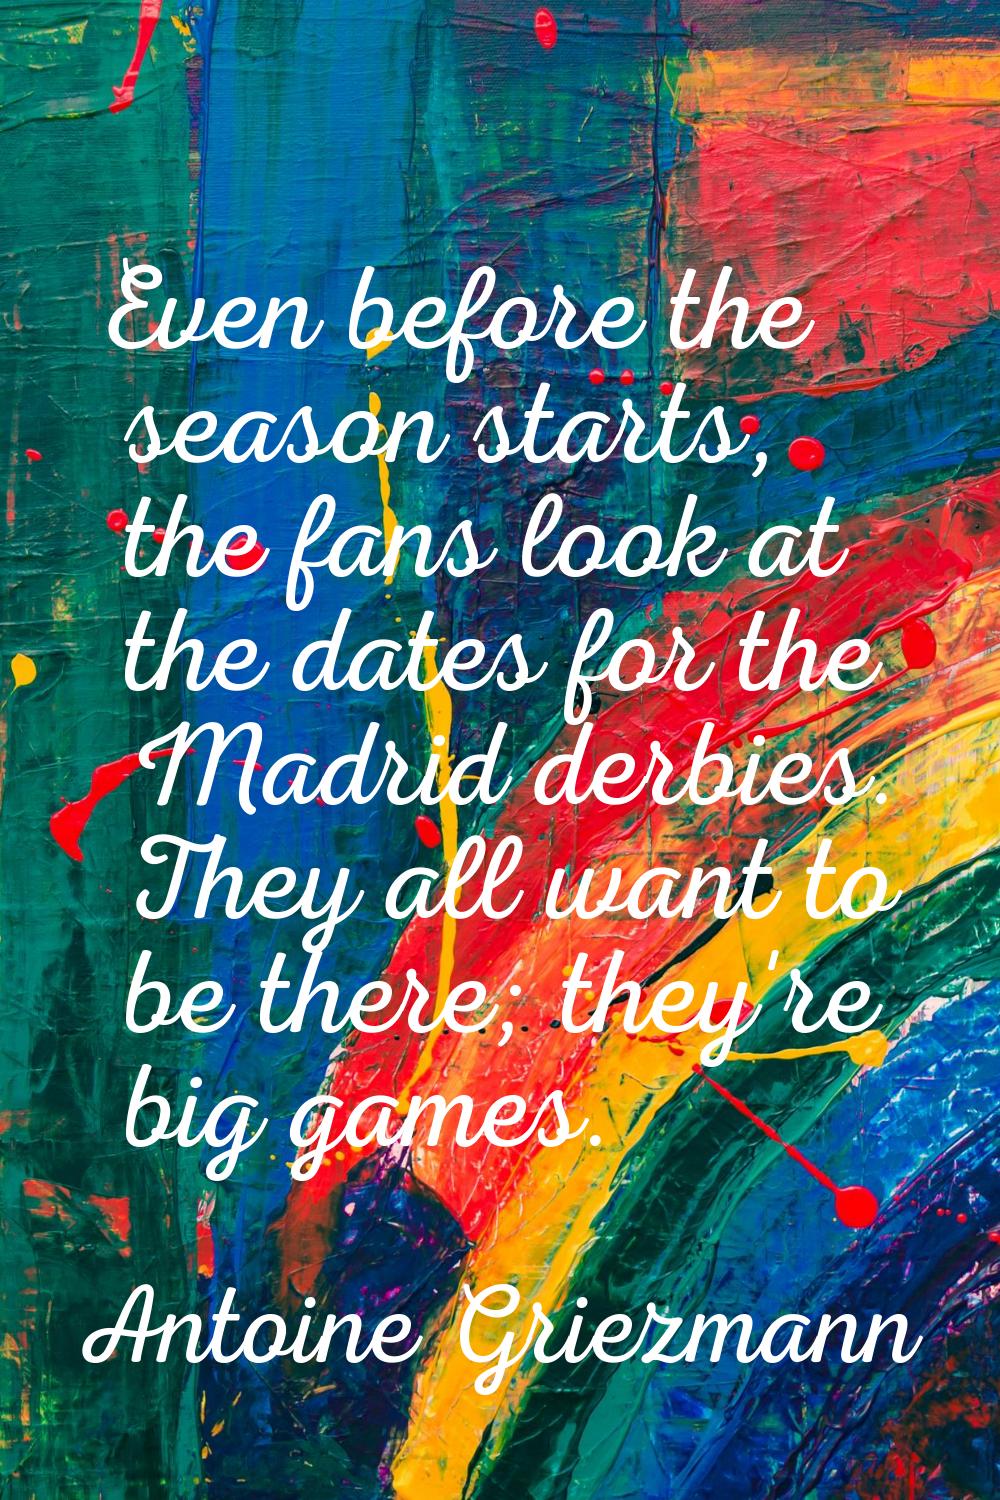 Even before the season starts, the fans look at the dates for the Madrid derbies. They all want to 